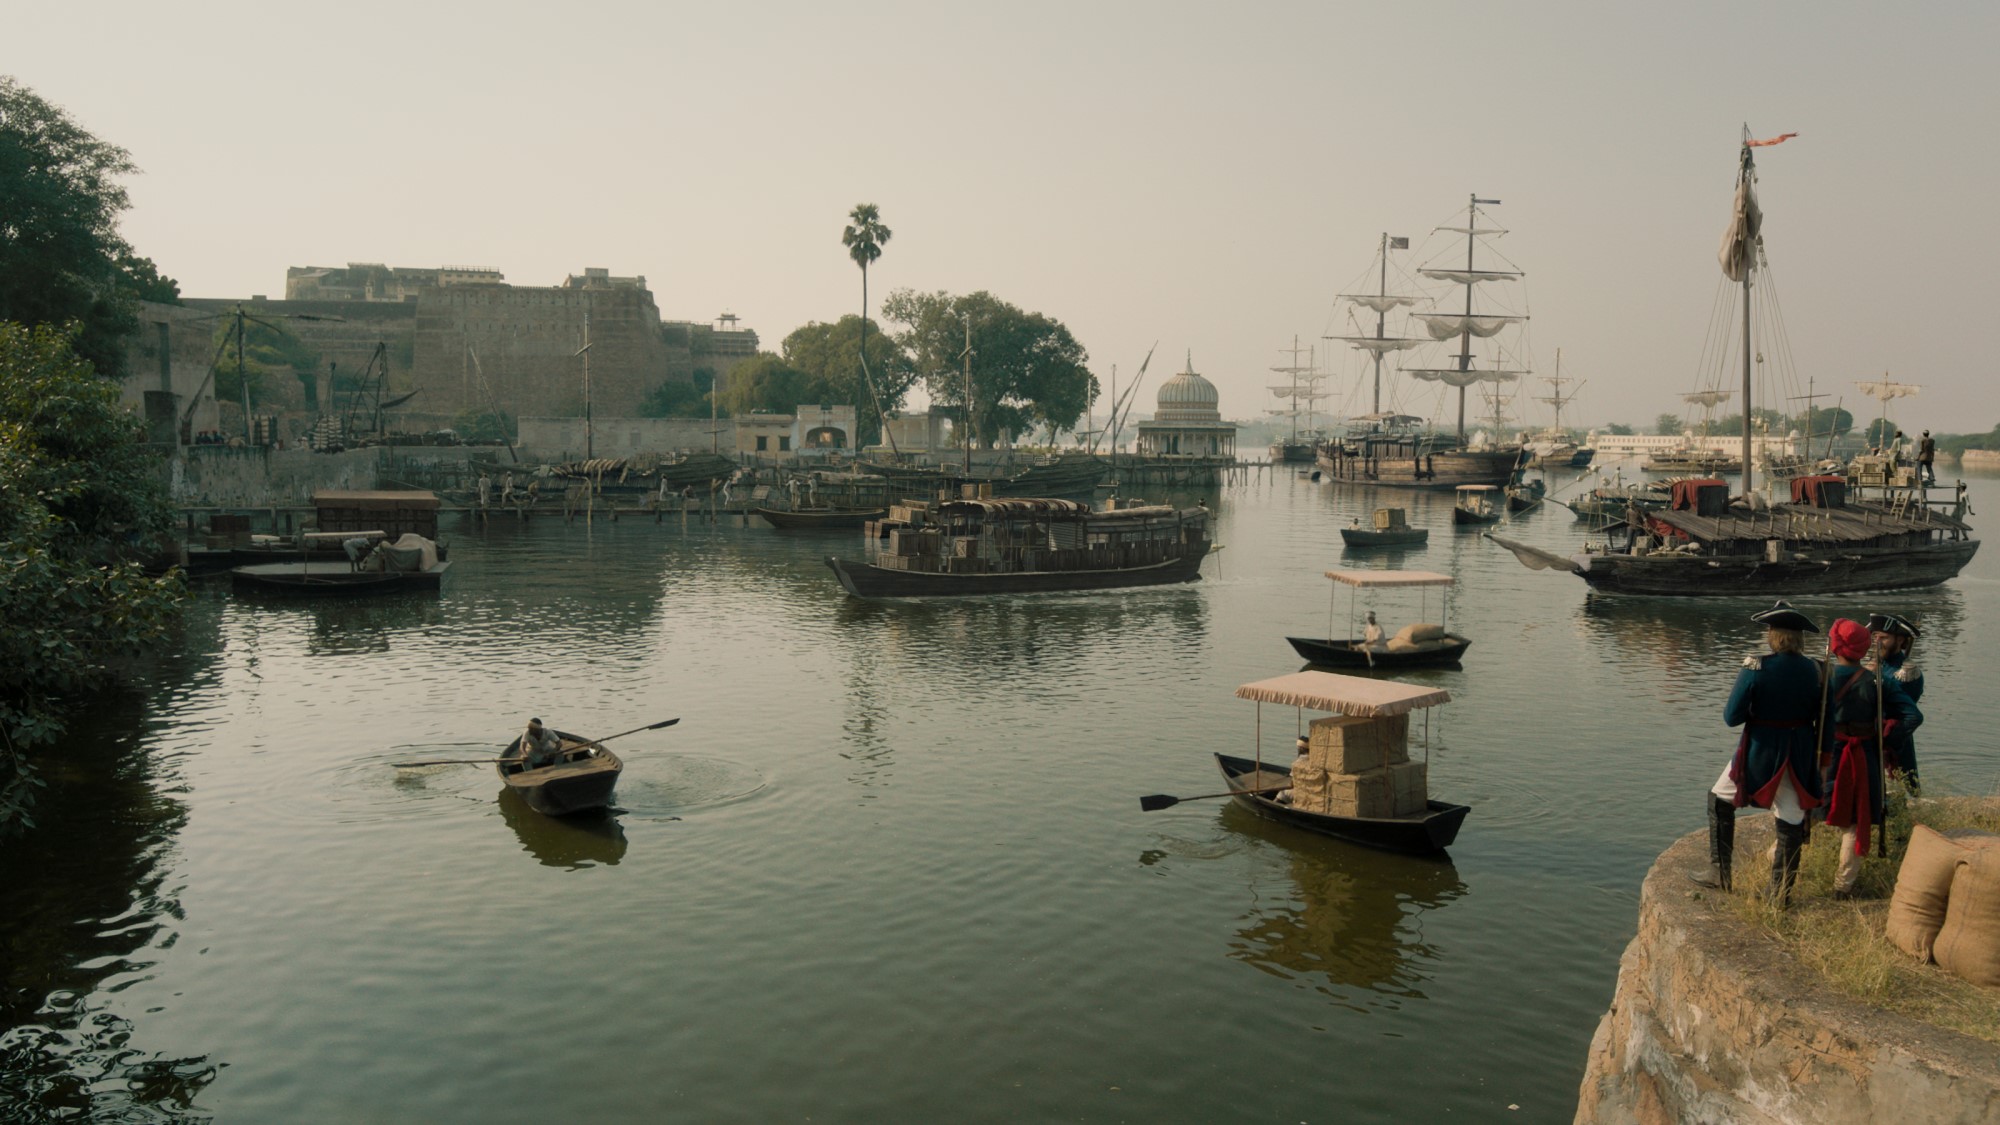 Vine FX, VFX shots for ITV's Beecham House after. Gurinder Chadha’s Beecham House, ITV’s new Indian drama set in 1795. Vine FX founder Michael Illingworth assisted during development and supervised the team of artist, creating set-extensions, matte paintings and period assets.